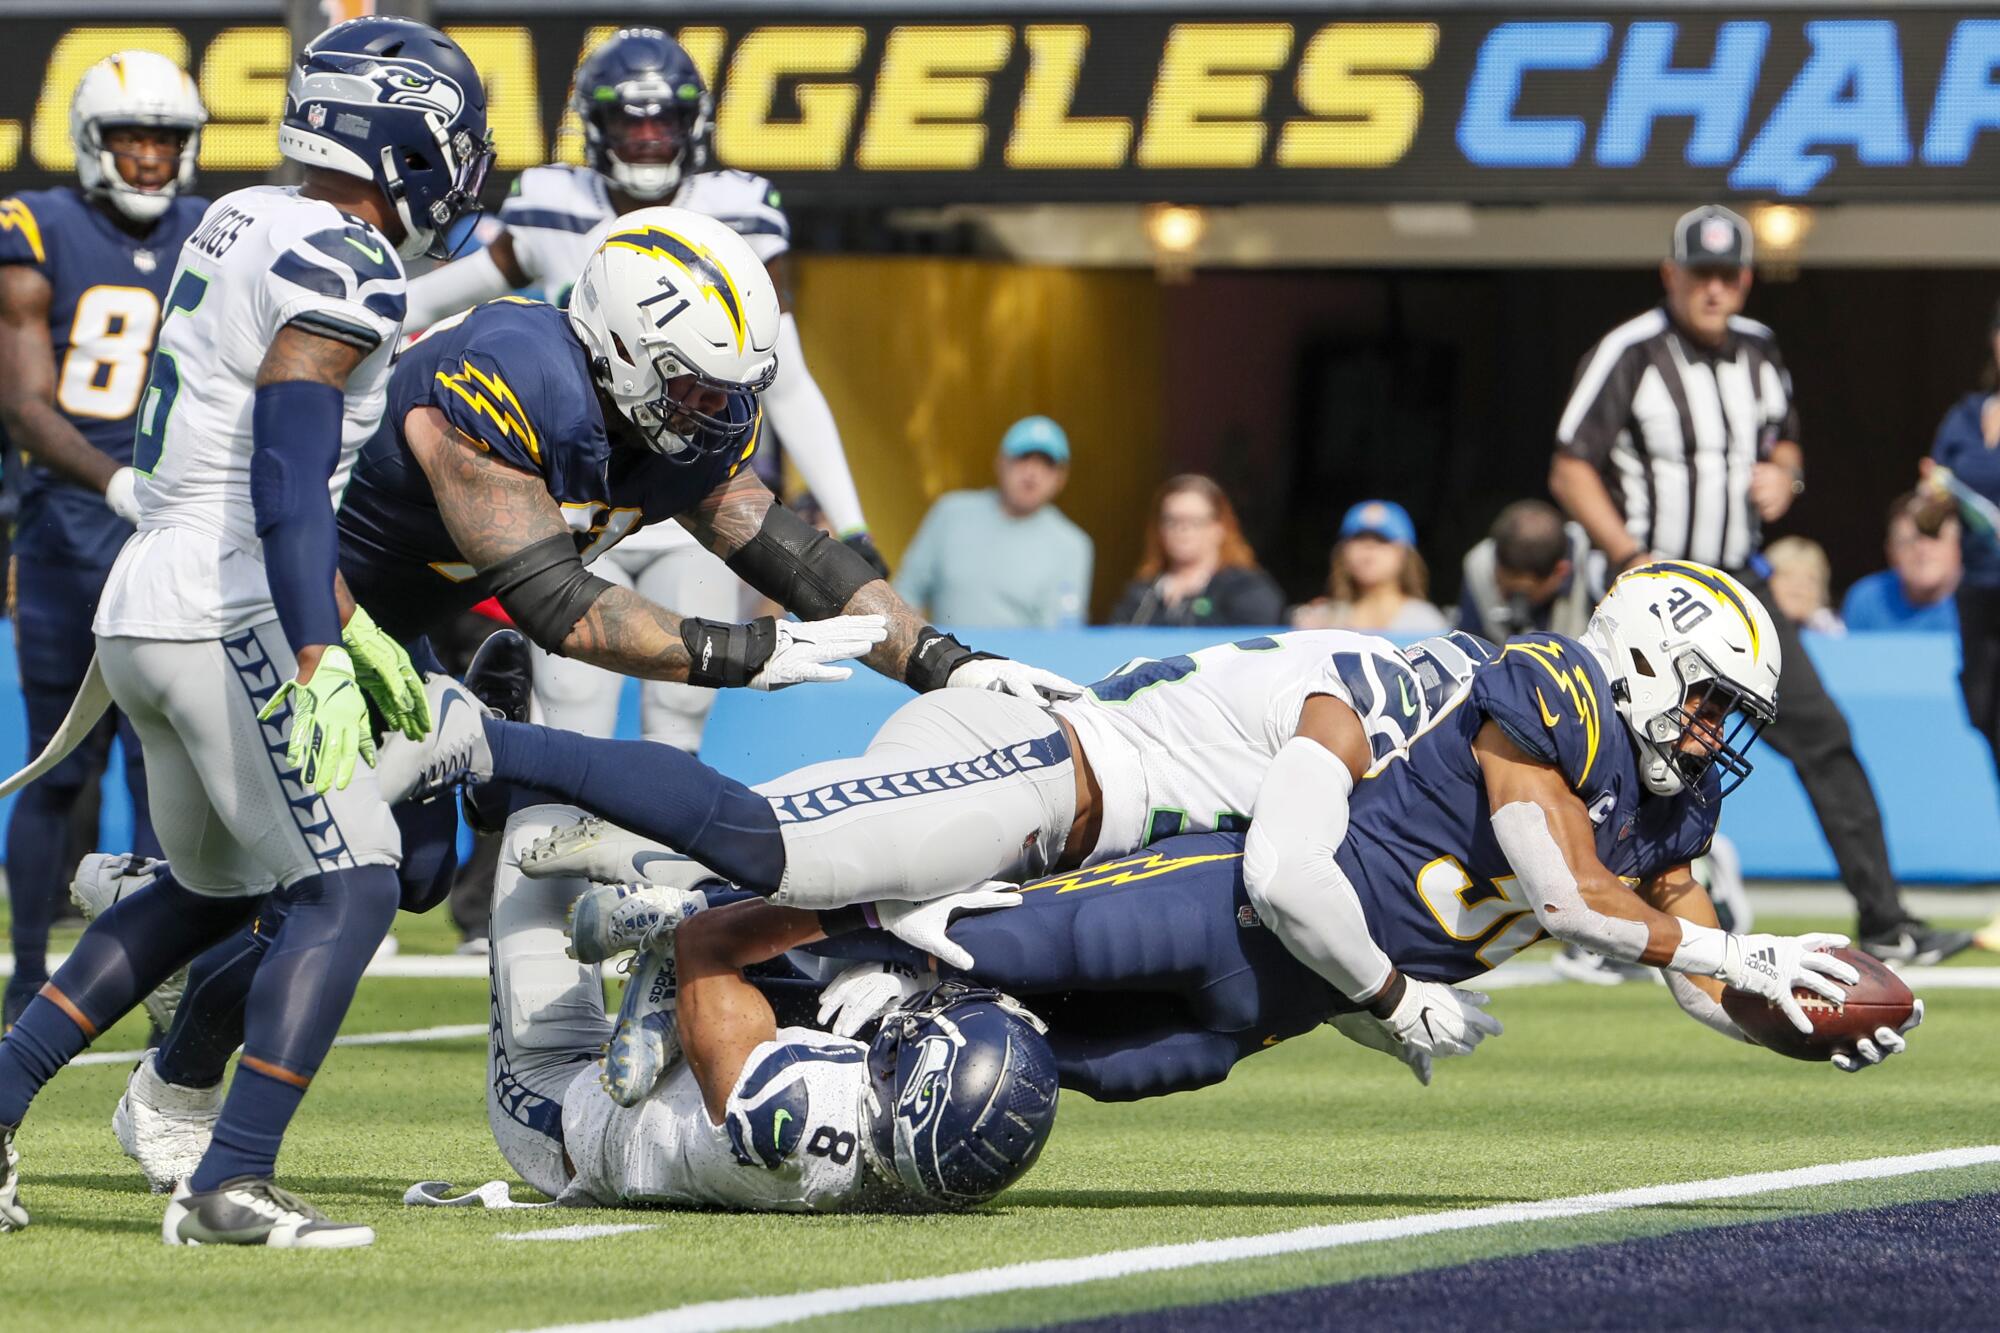 Chargers running back Austin Ekeler dives into the end zone for a first-half touchdown.